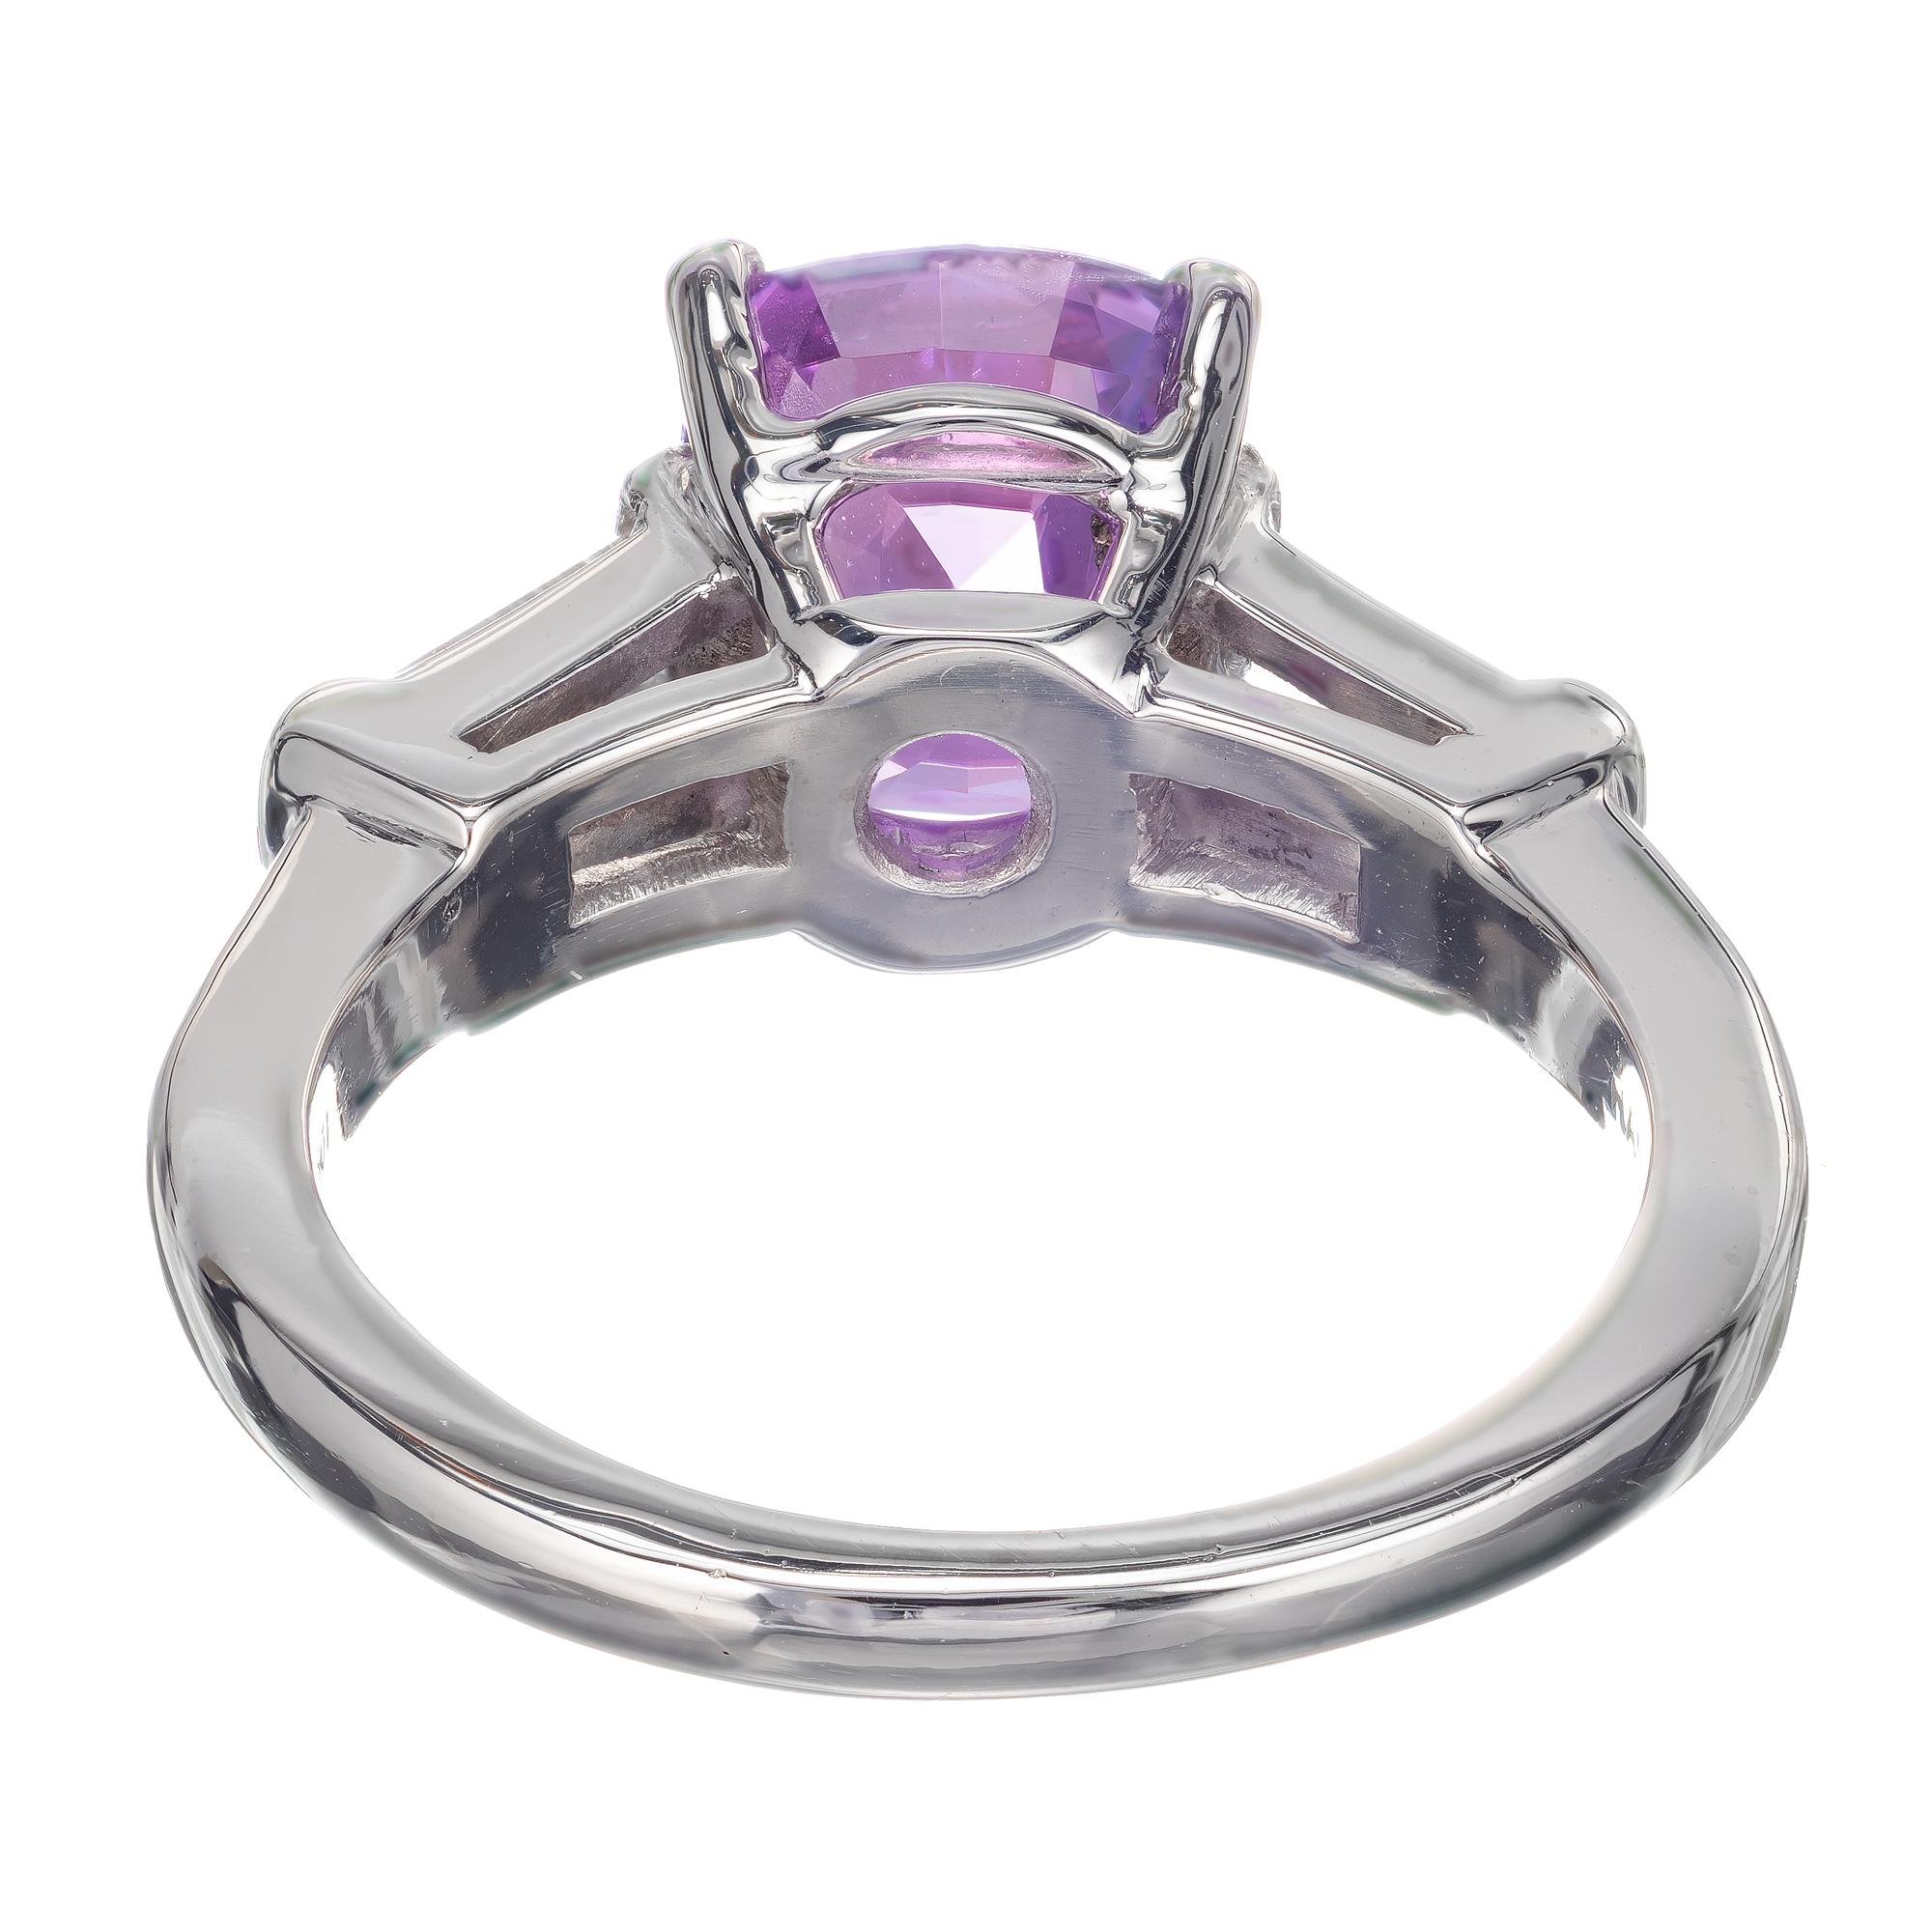 Peter Suchy AGL Certified 2.67 Carat Pink Sapphire Diamond Platinum Ring In New Condition For Sale In Stamford, CT